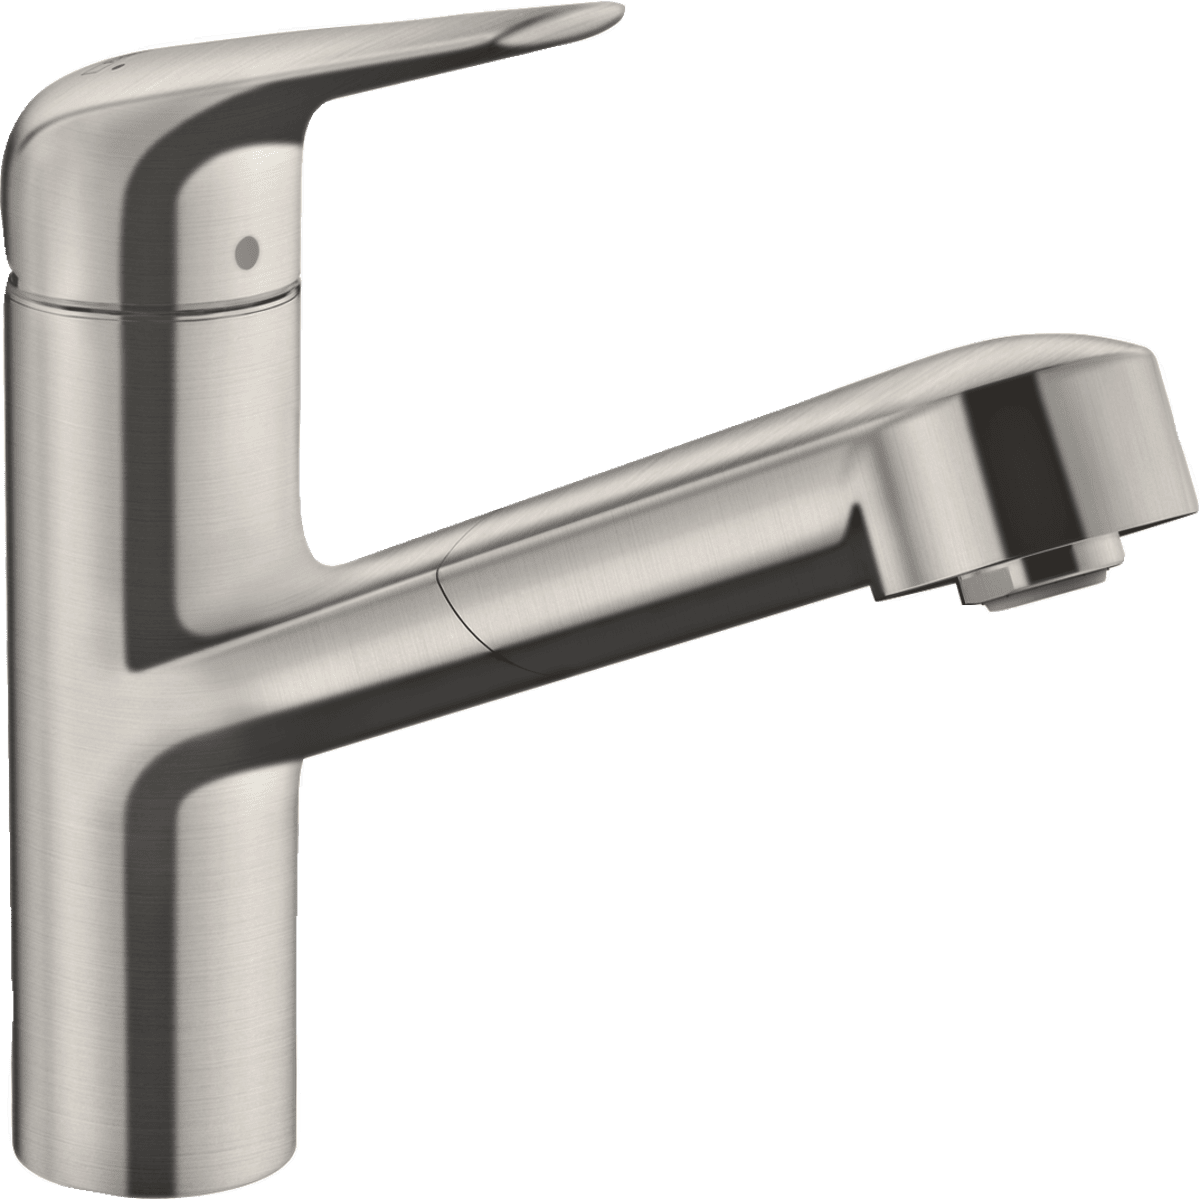 Picture of HANSGROHE Focus M42 Single lever kitchen mixer 150, pull-out spout, 1jet #71814800 - Stainless Steel Finish